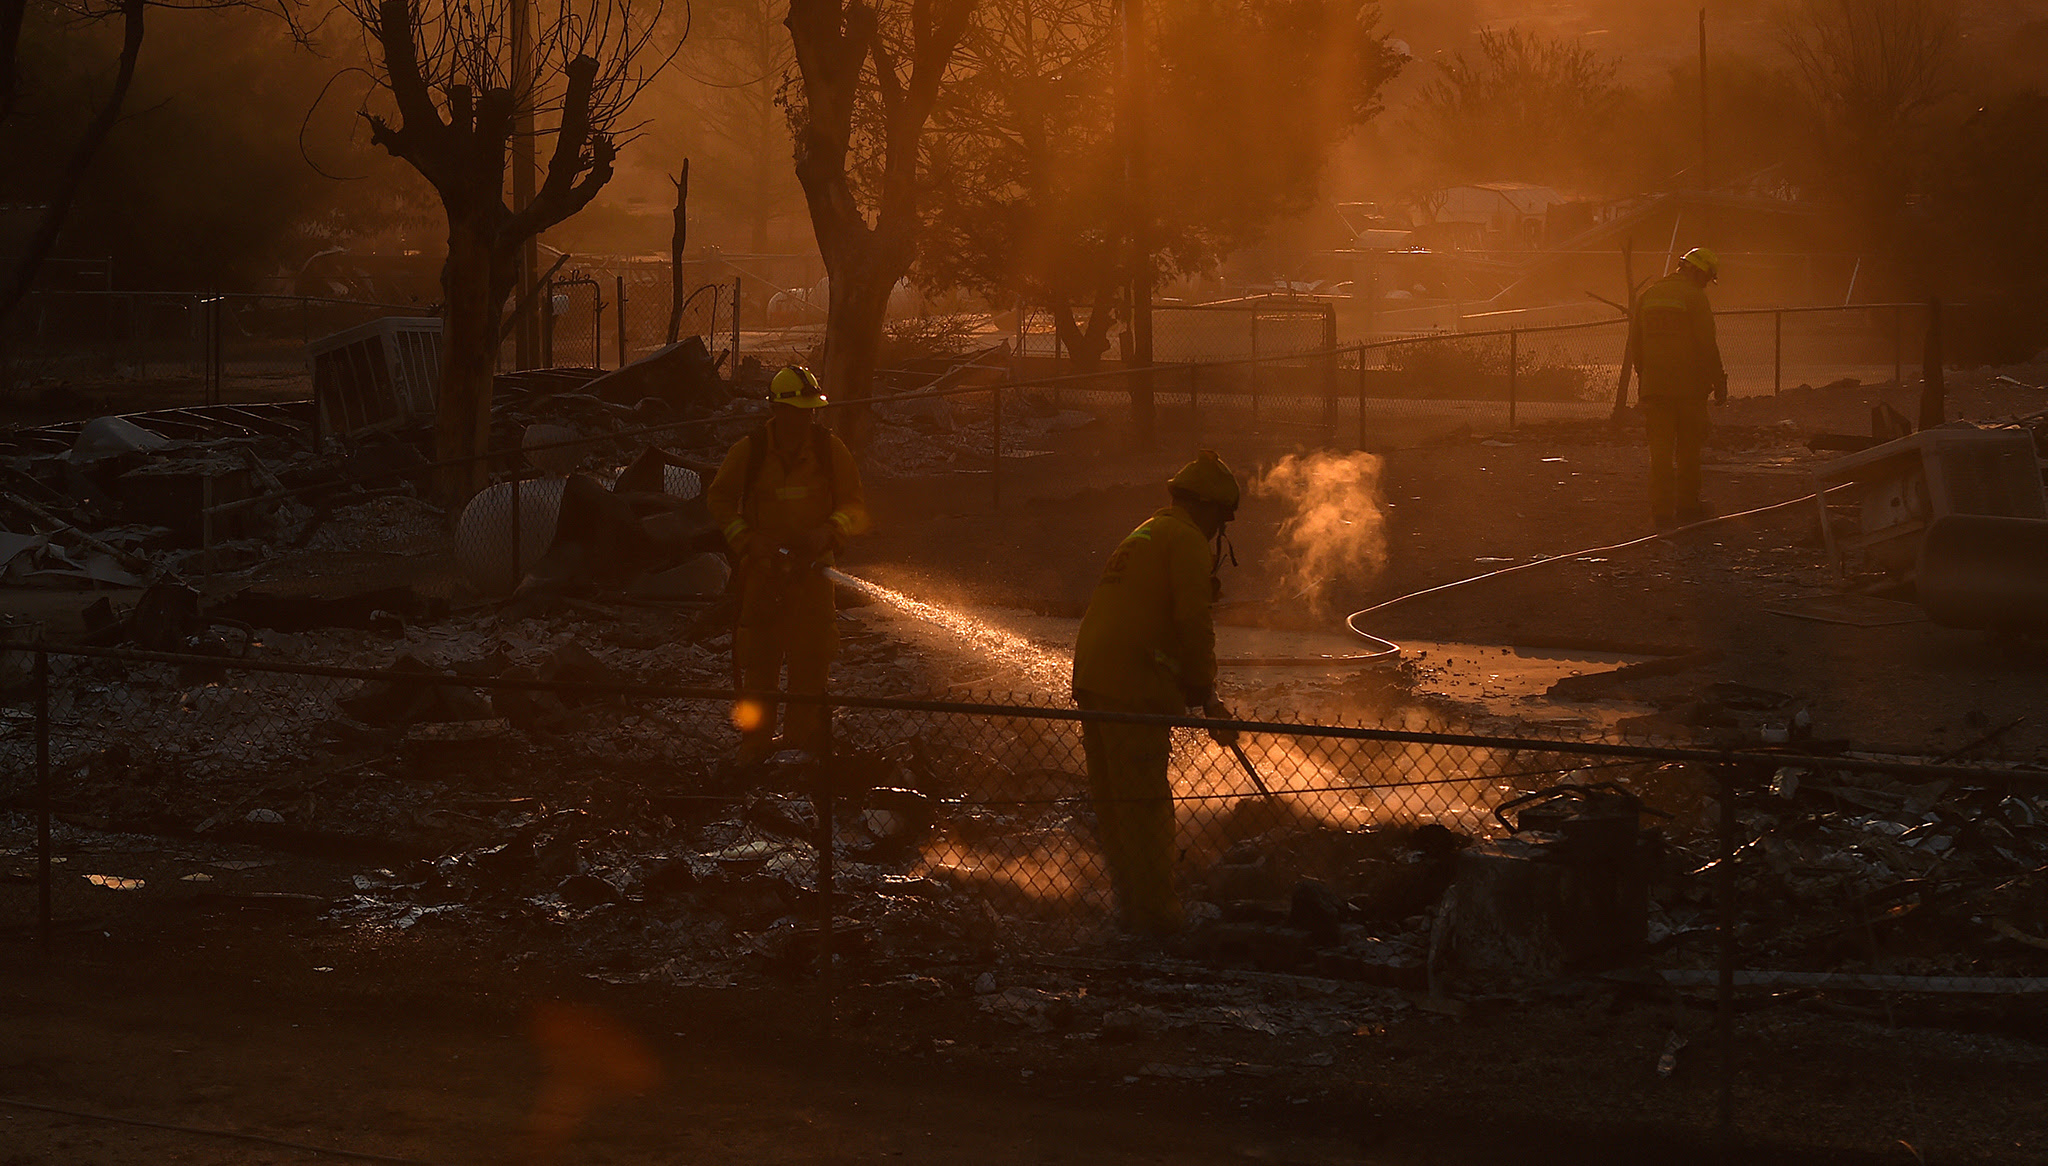 Firefighters mop-up a hot spot  at a residence levelled by the Erskine Fire in South Lake, California, USA